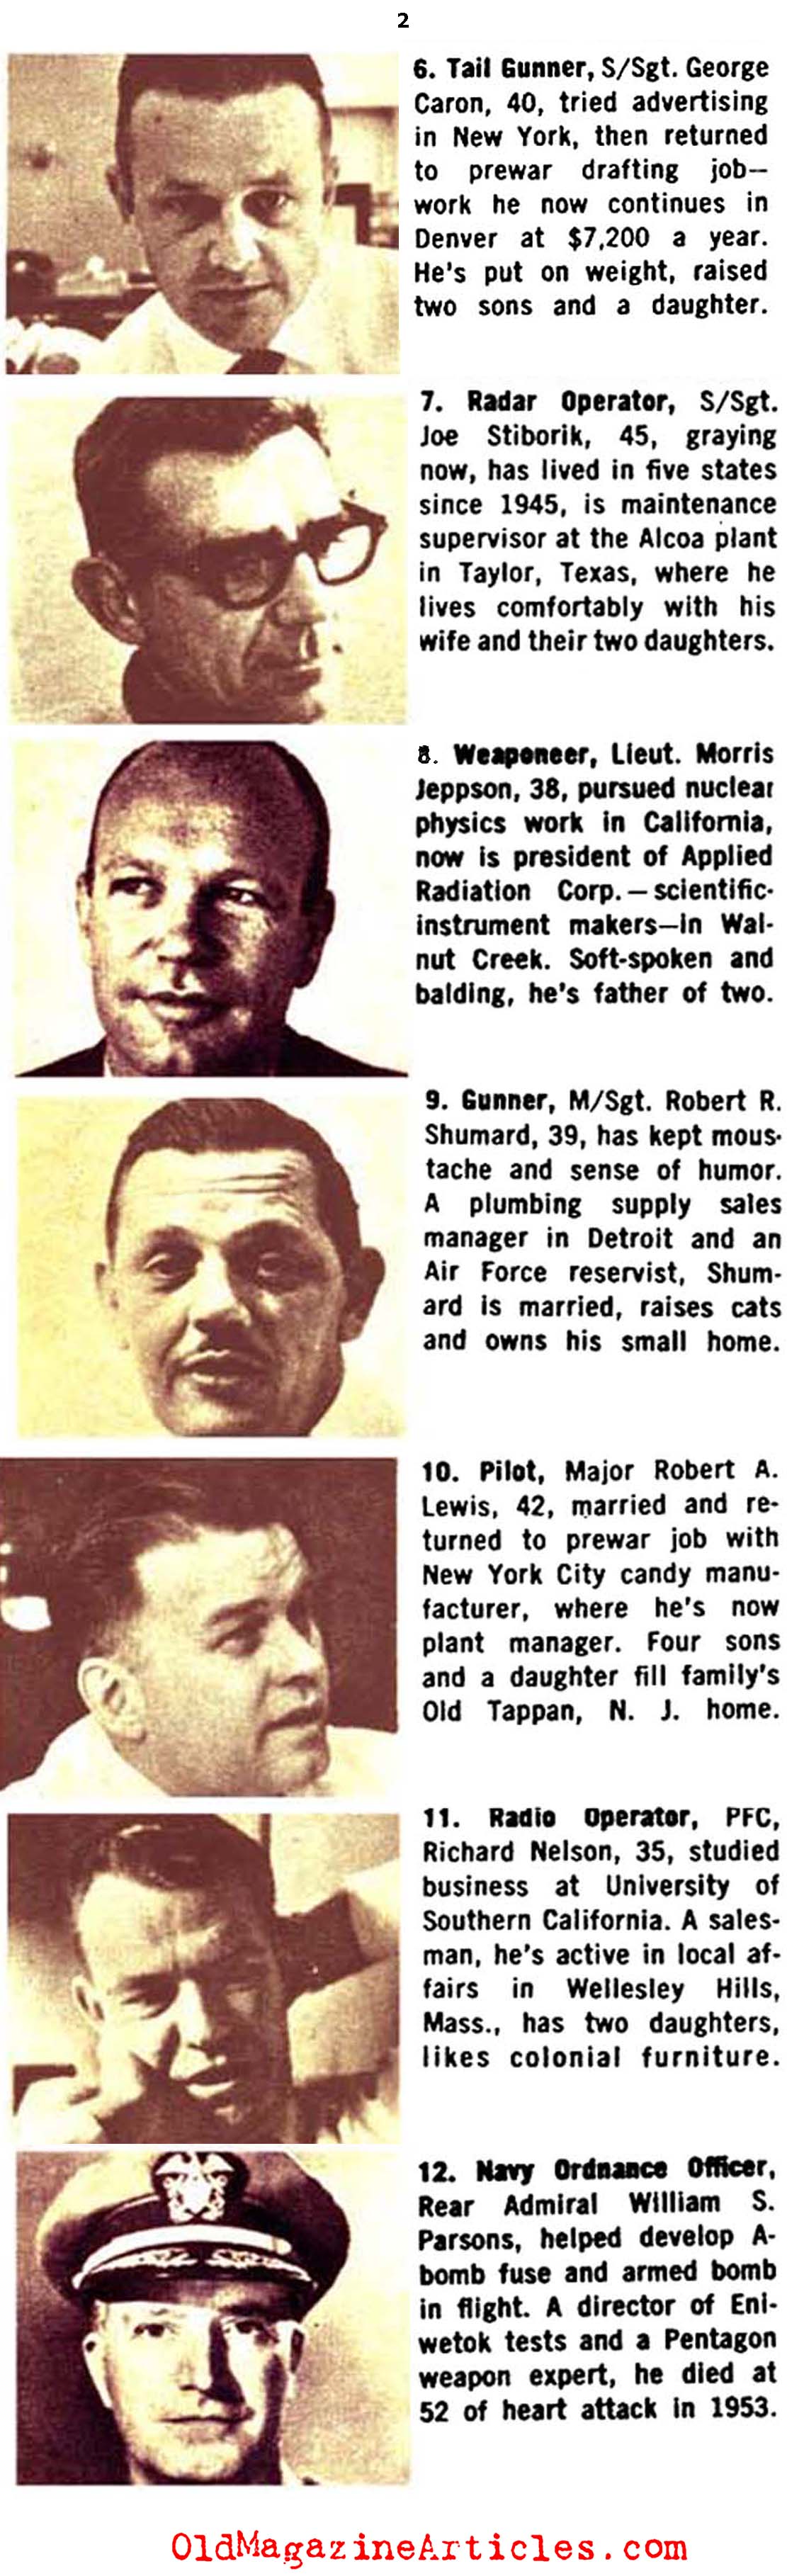 The Crew of the Enola Gay Fifteen Years Later   (Coronet Magazine, 1960)